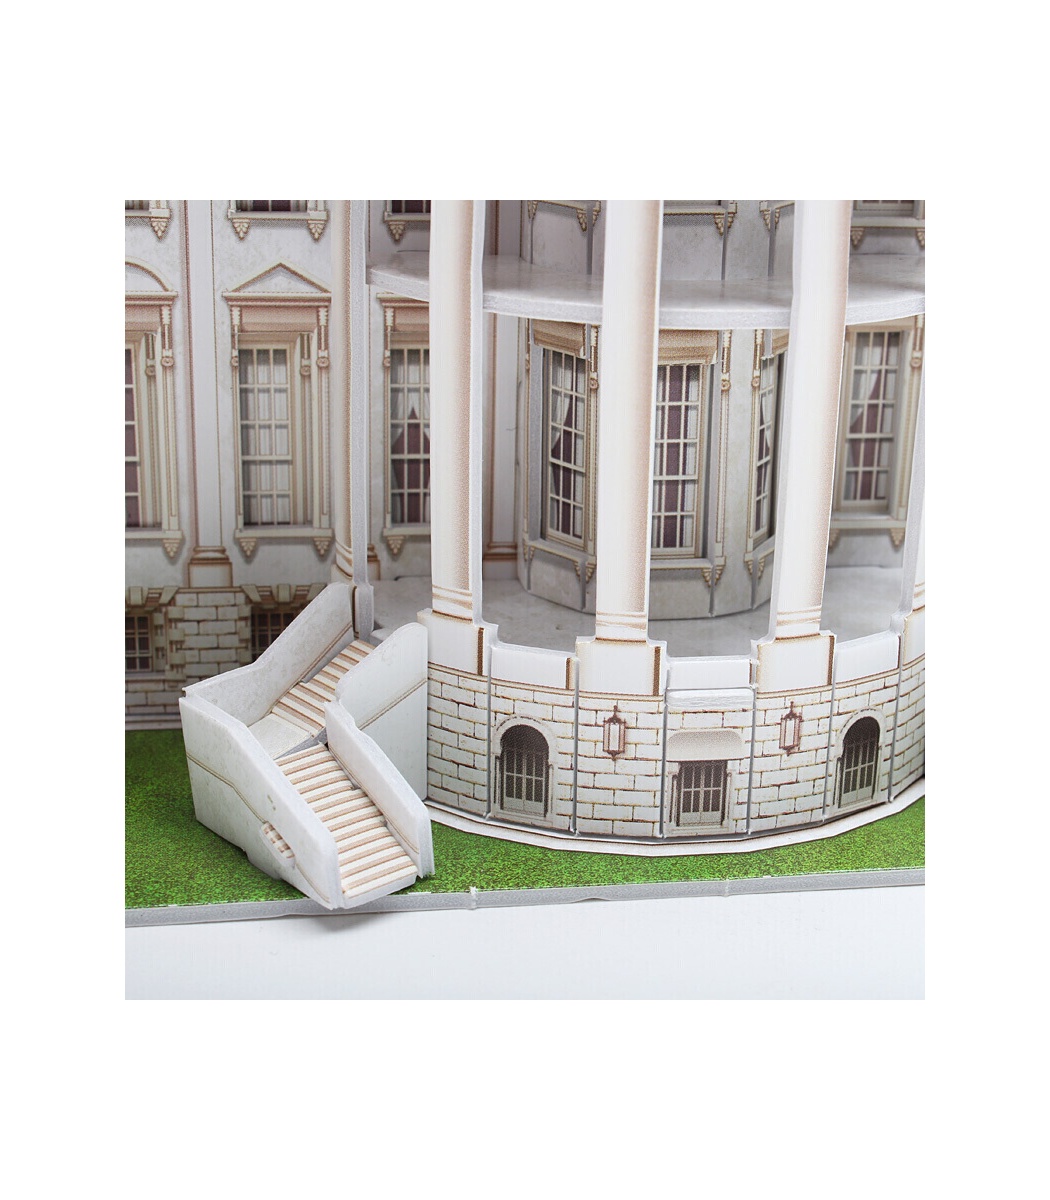 Cubic Fun 3D Puzzle C060H The White House,World Great Building Jigsaws in 56 PCS 